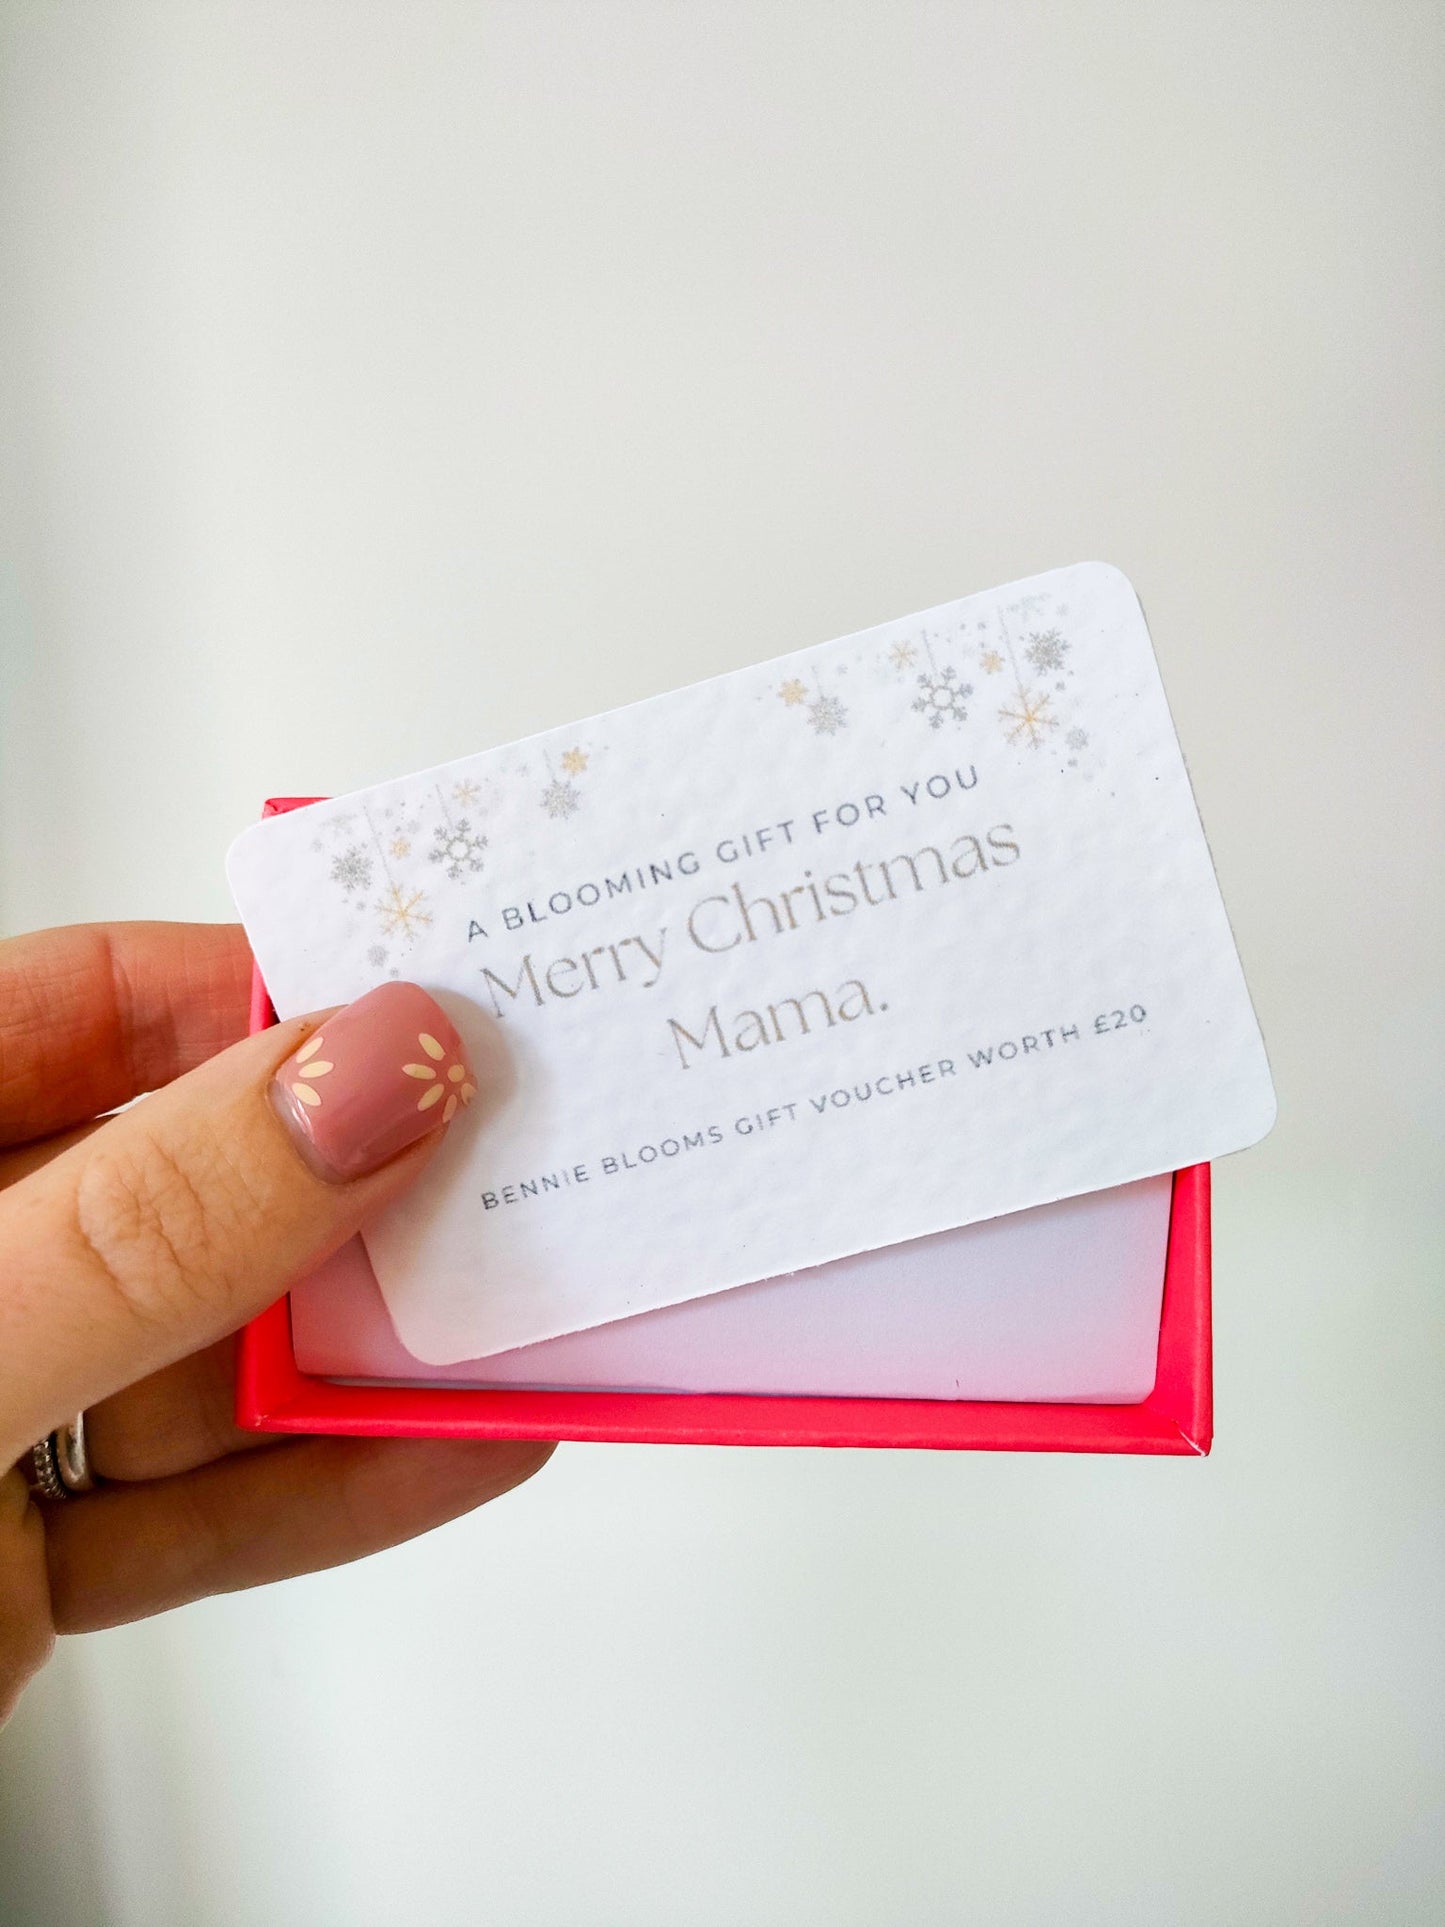 Mama Christmas Giftcard - Bennie Blooms Breastfeeding, Teething and Fiddle Jewellery at its finest.